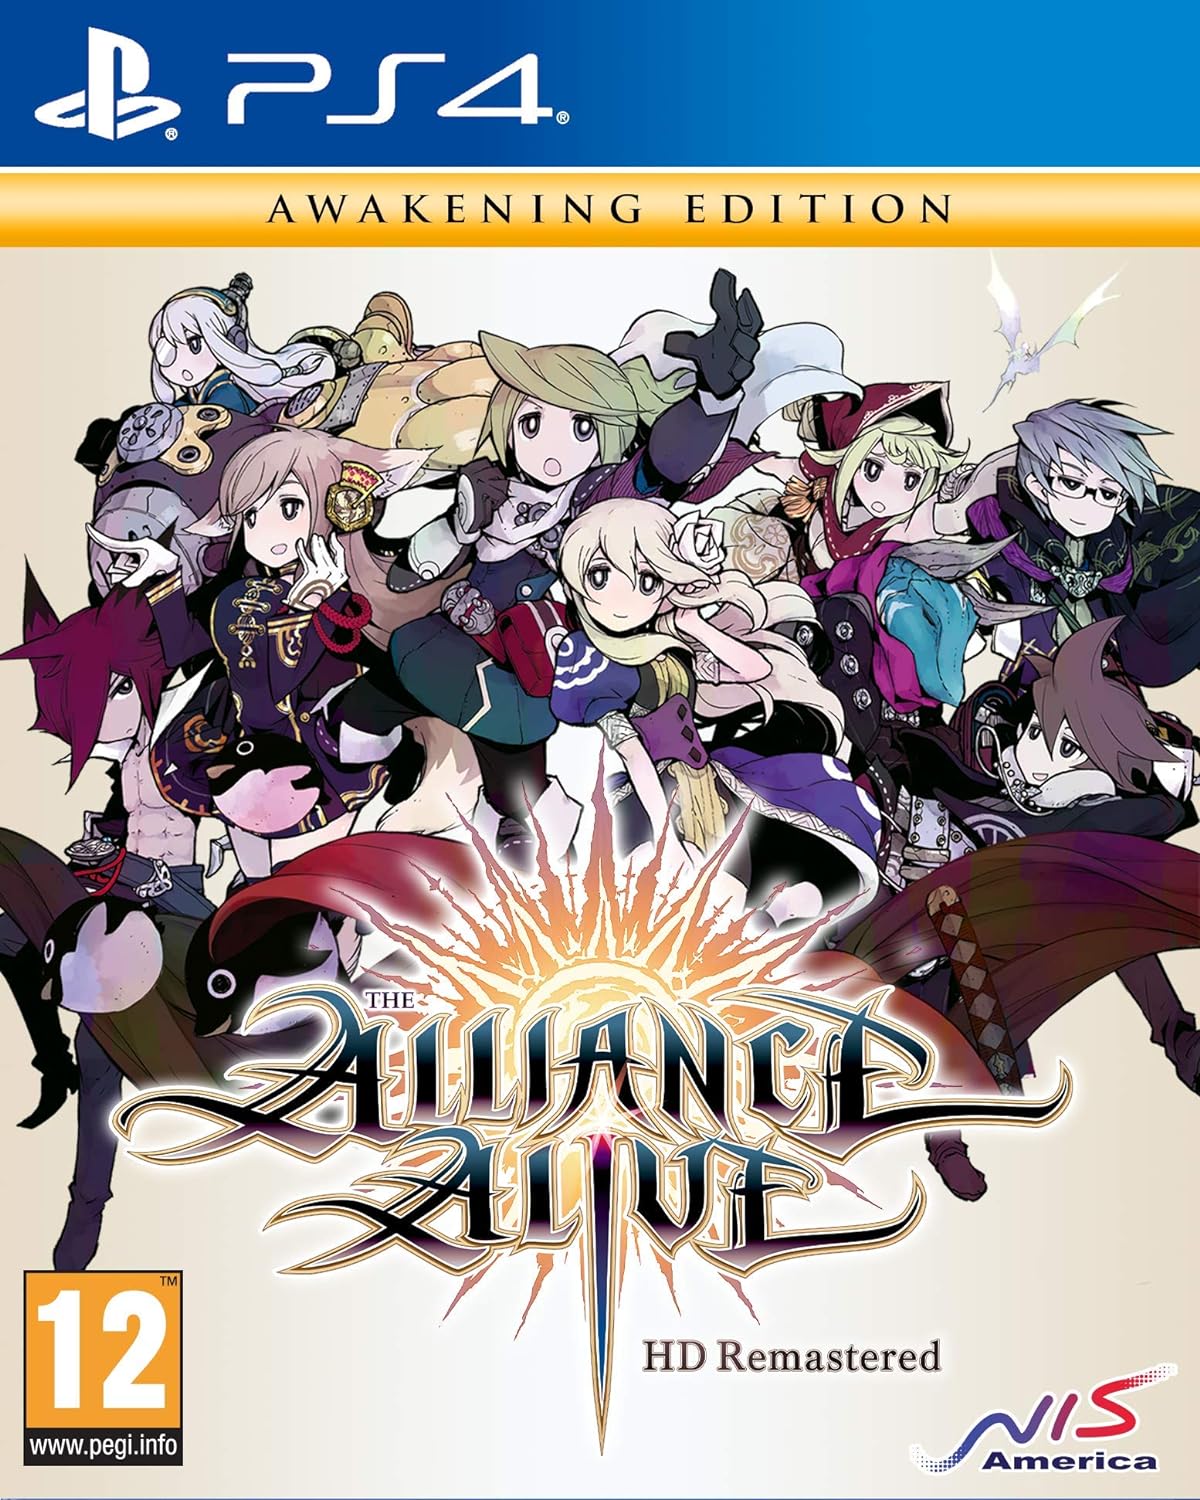 Sony PS4 The Alliance Alive HD Remastered (Awakening Edition)